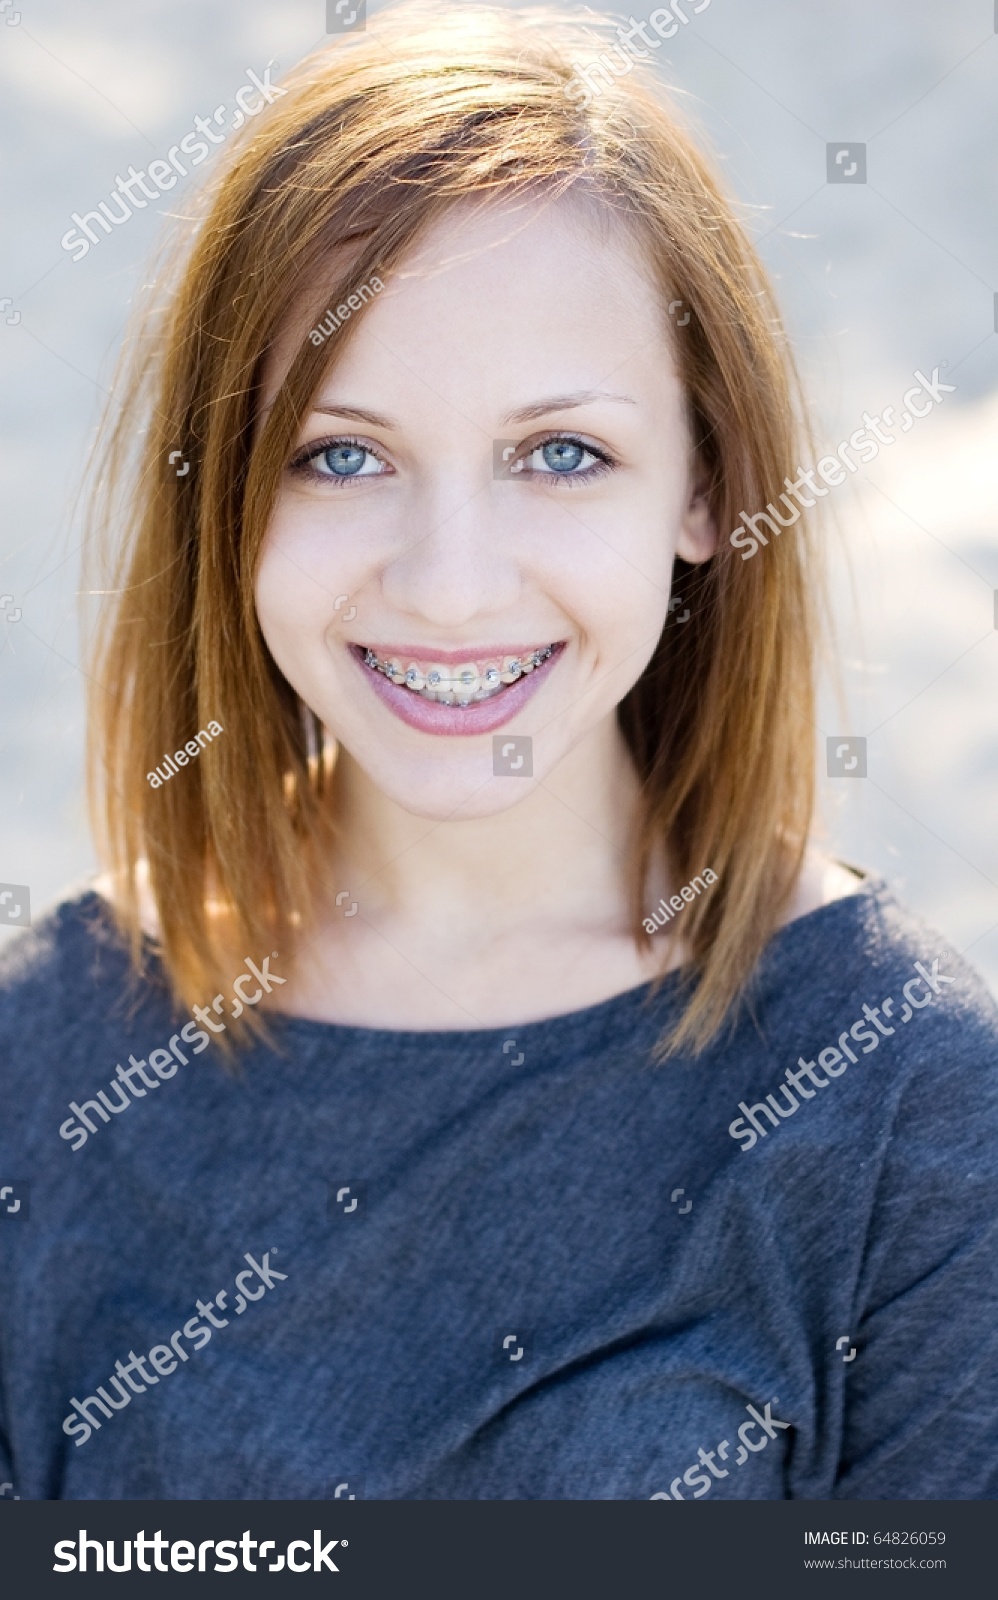 Charming Young Teenage Girl Wearing Braces And Smiling Cheerfully Stock ...